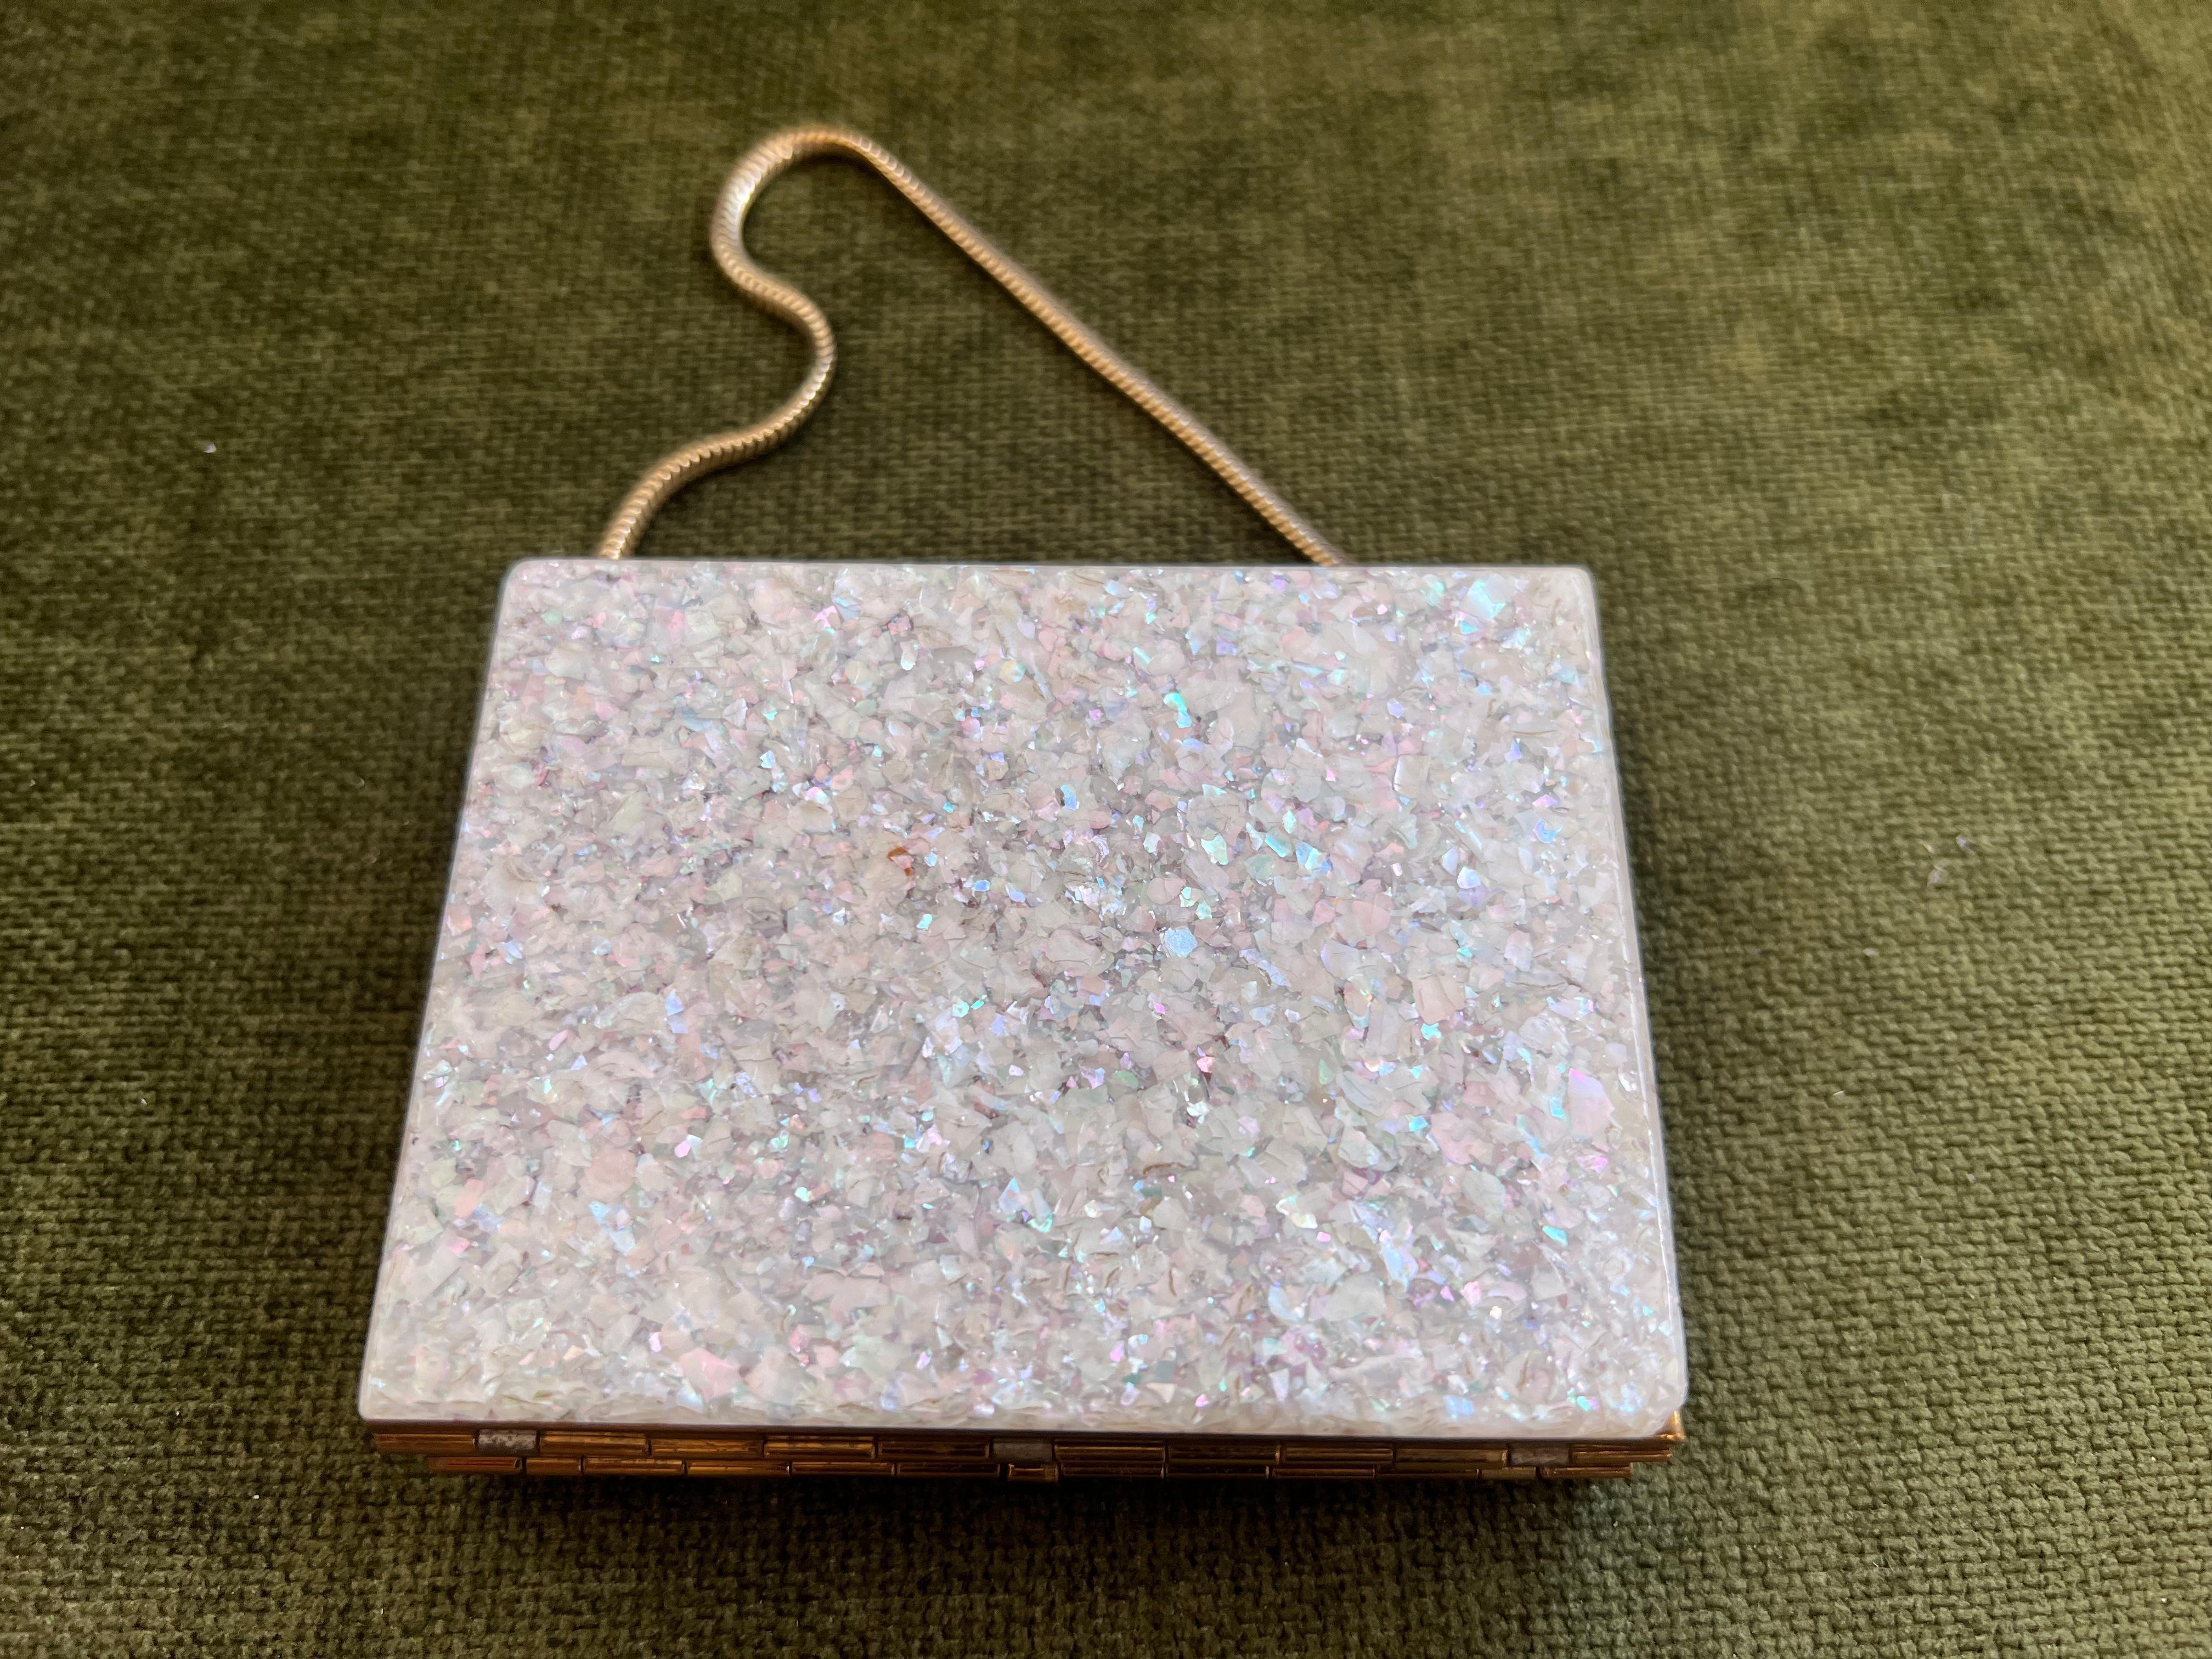 1950s mid-century EVANS wristlet compact and cigarette case with Mother of Pearl cover.
This elegant vintage wristlet is in excellent condition and perfectly giftable in quality and presentation. This piece has been tucked away for decades and shows